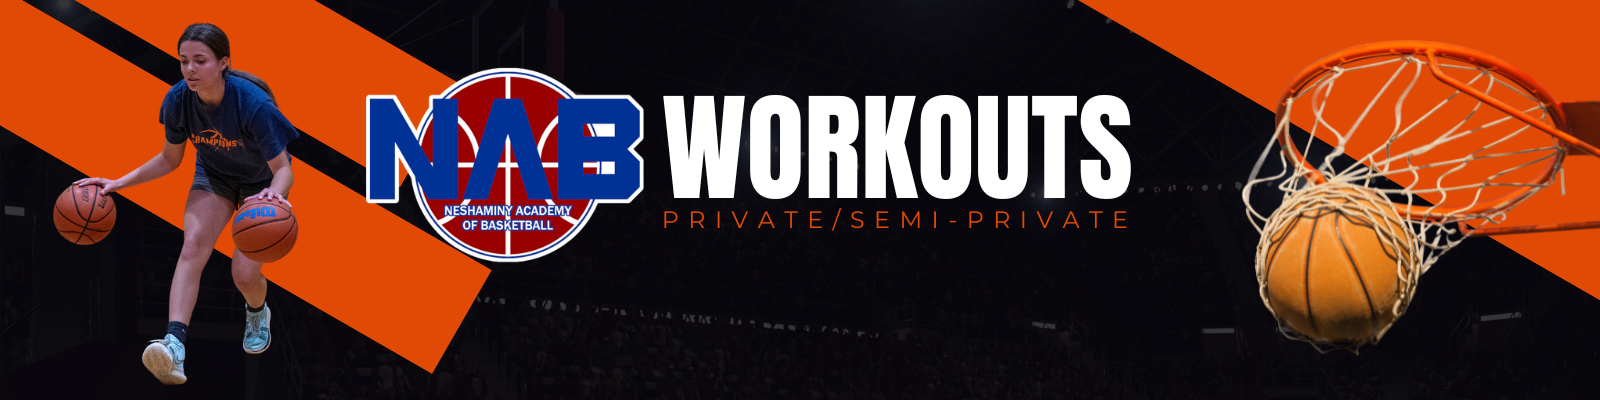 Workouts Form Banner